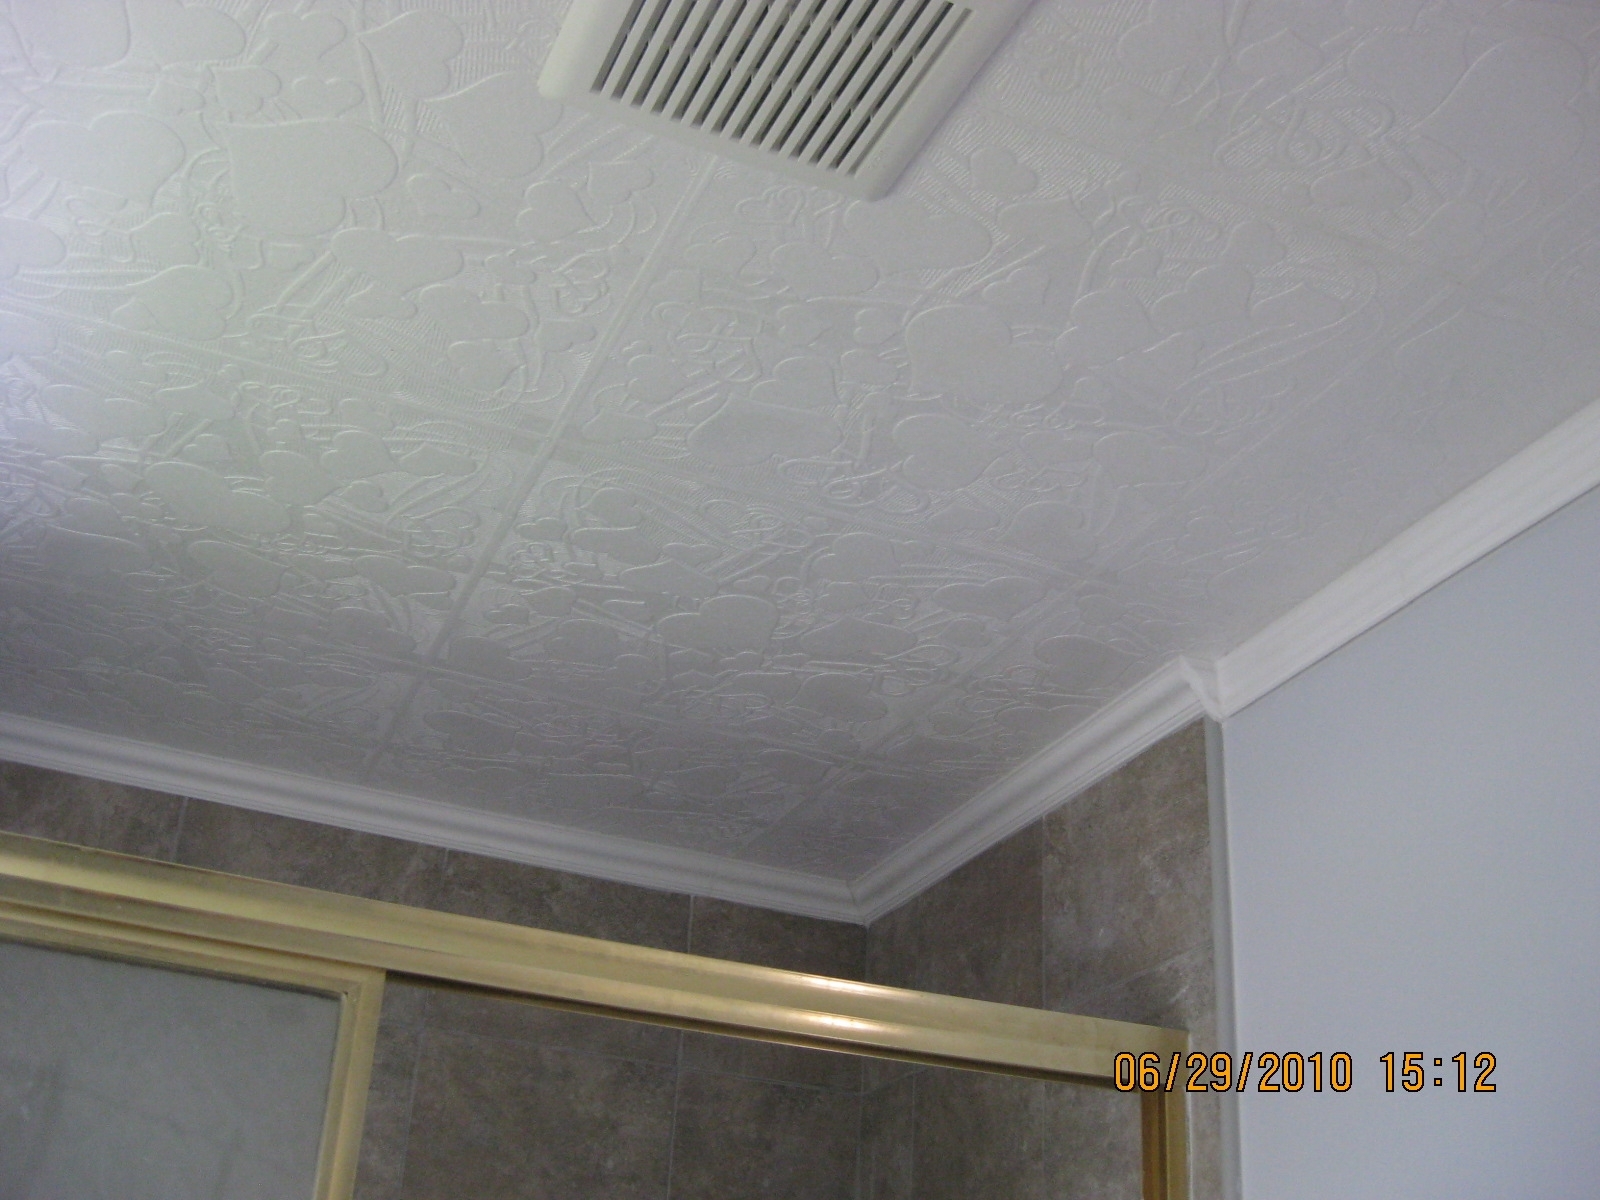 Polystyrene Ceiling Tiles Are They Illegal Polystyrene Ceiling Tiles Are They Illegal polystyrene ceiling tiles illegal image collections tile 1600 X 1200